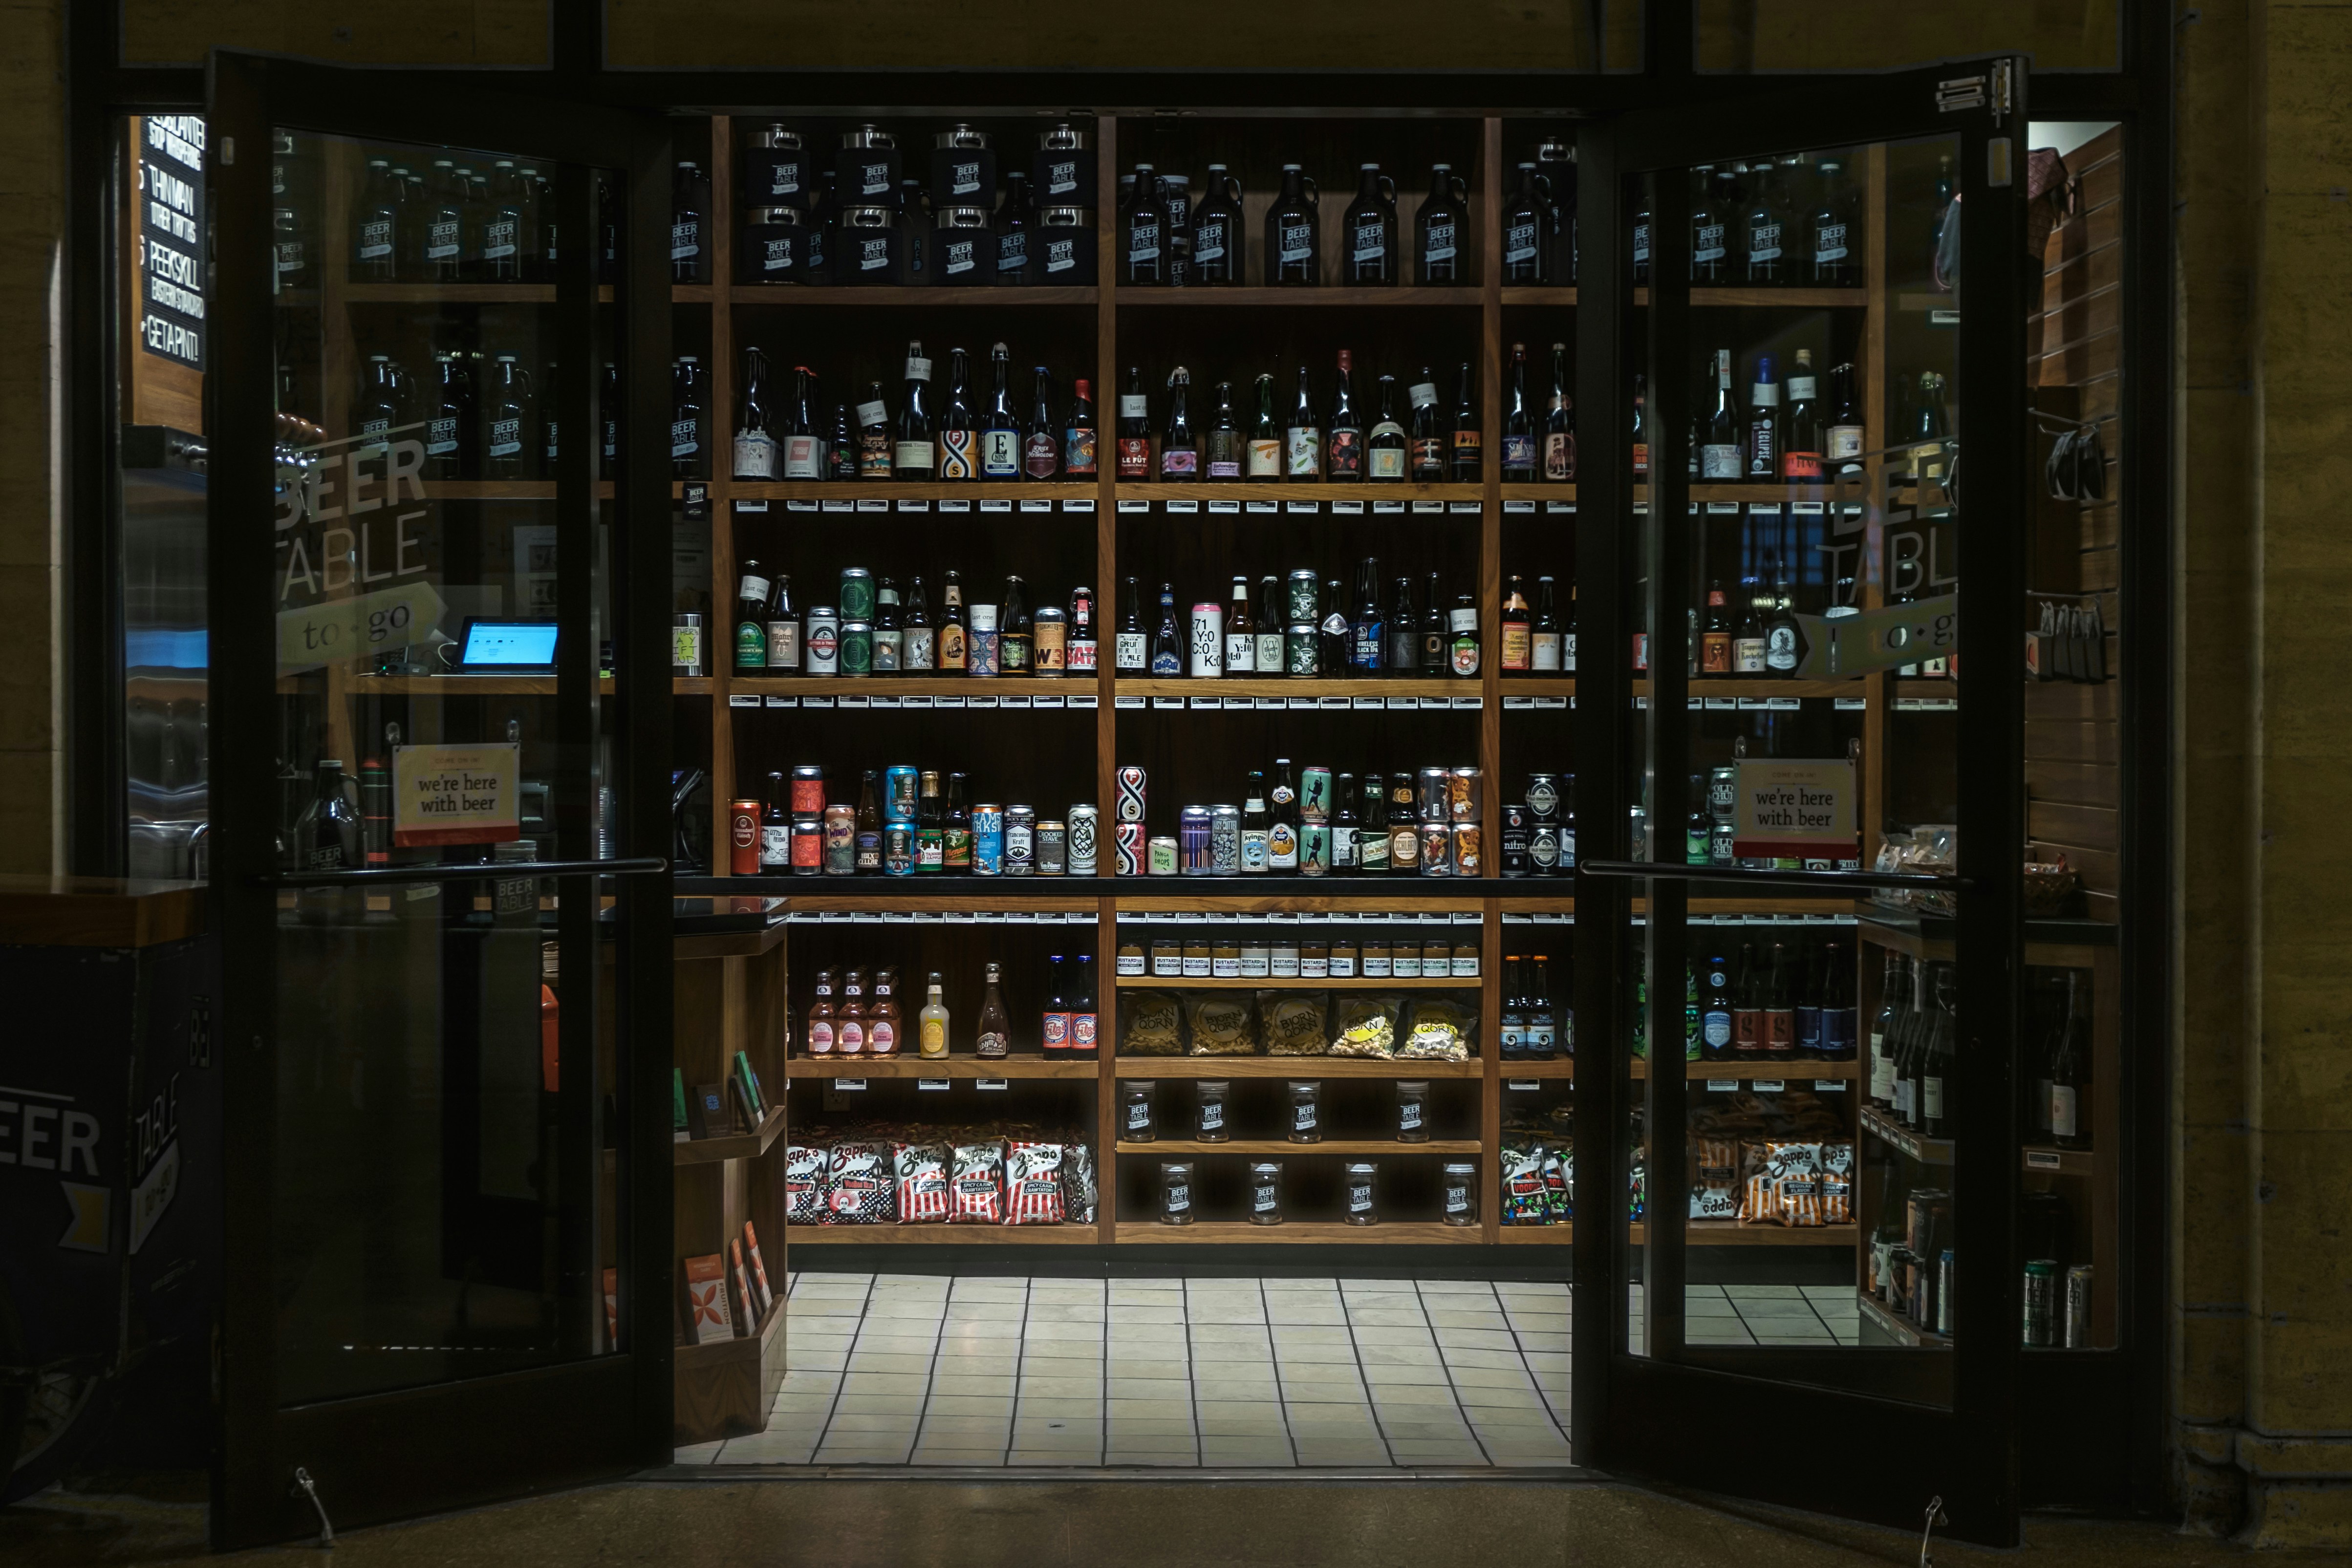 After getting off the metro north, I was walking out to Lexington when I saw this store empty with the lights on. I figured that it would be an interesting shot with the light hitting the bottles in a very unique way, so I snapped it, then edited it a tiny bit ti enhance some of the colors. Shot with my Fuji XT-1